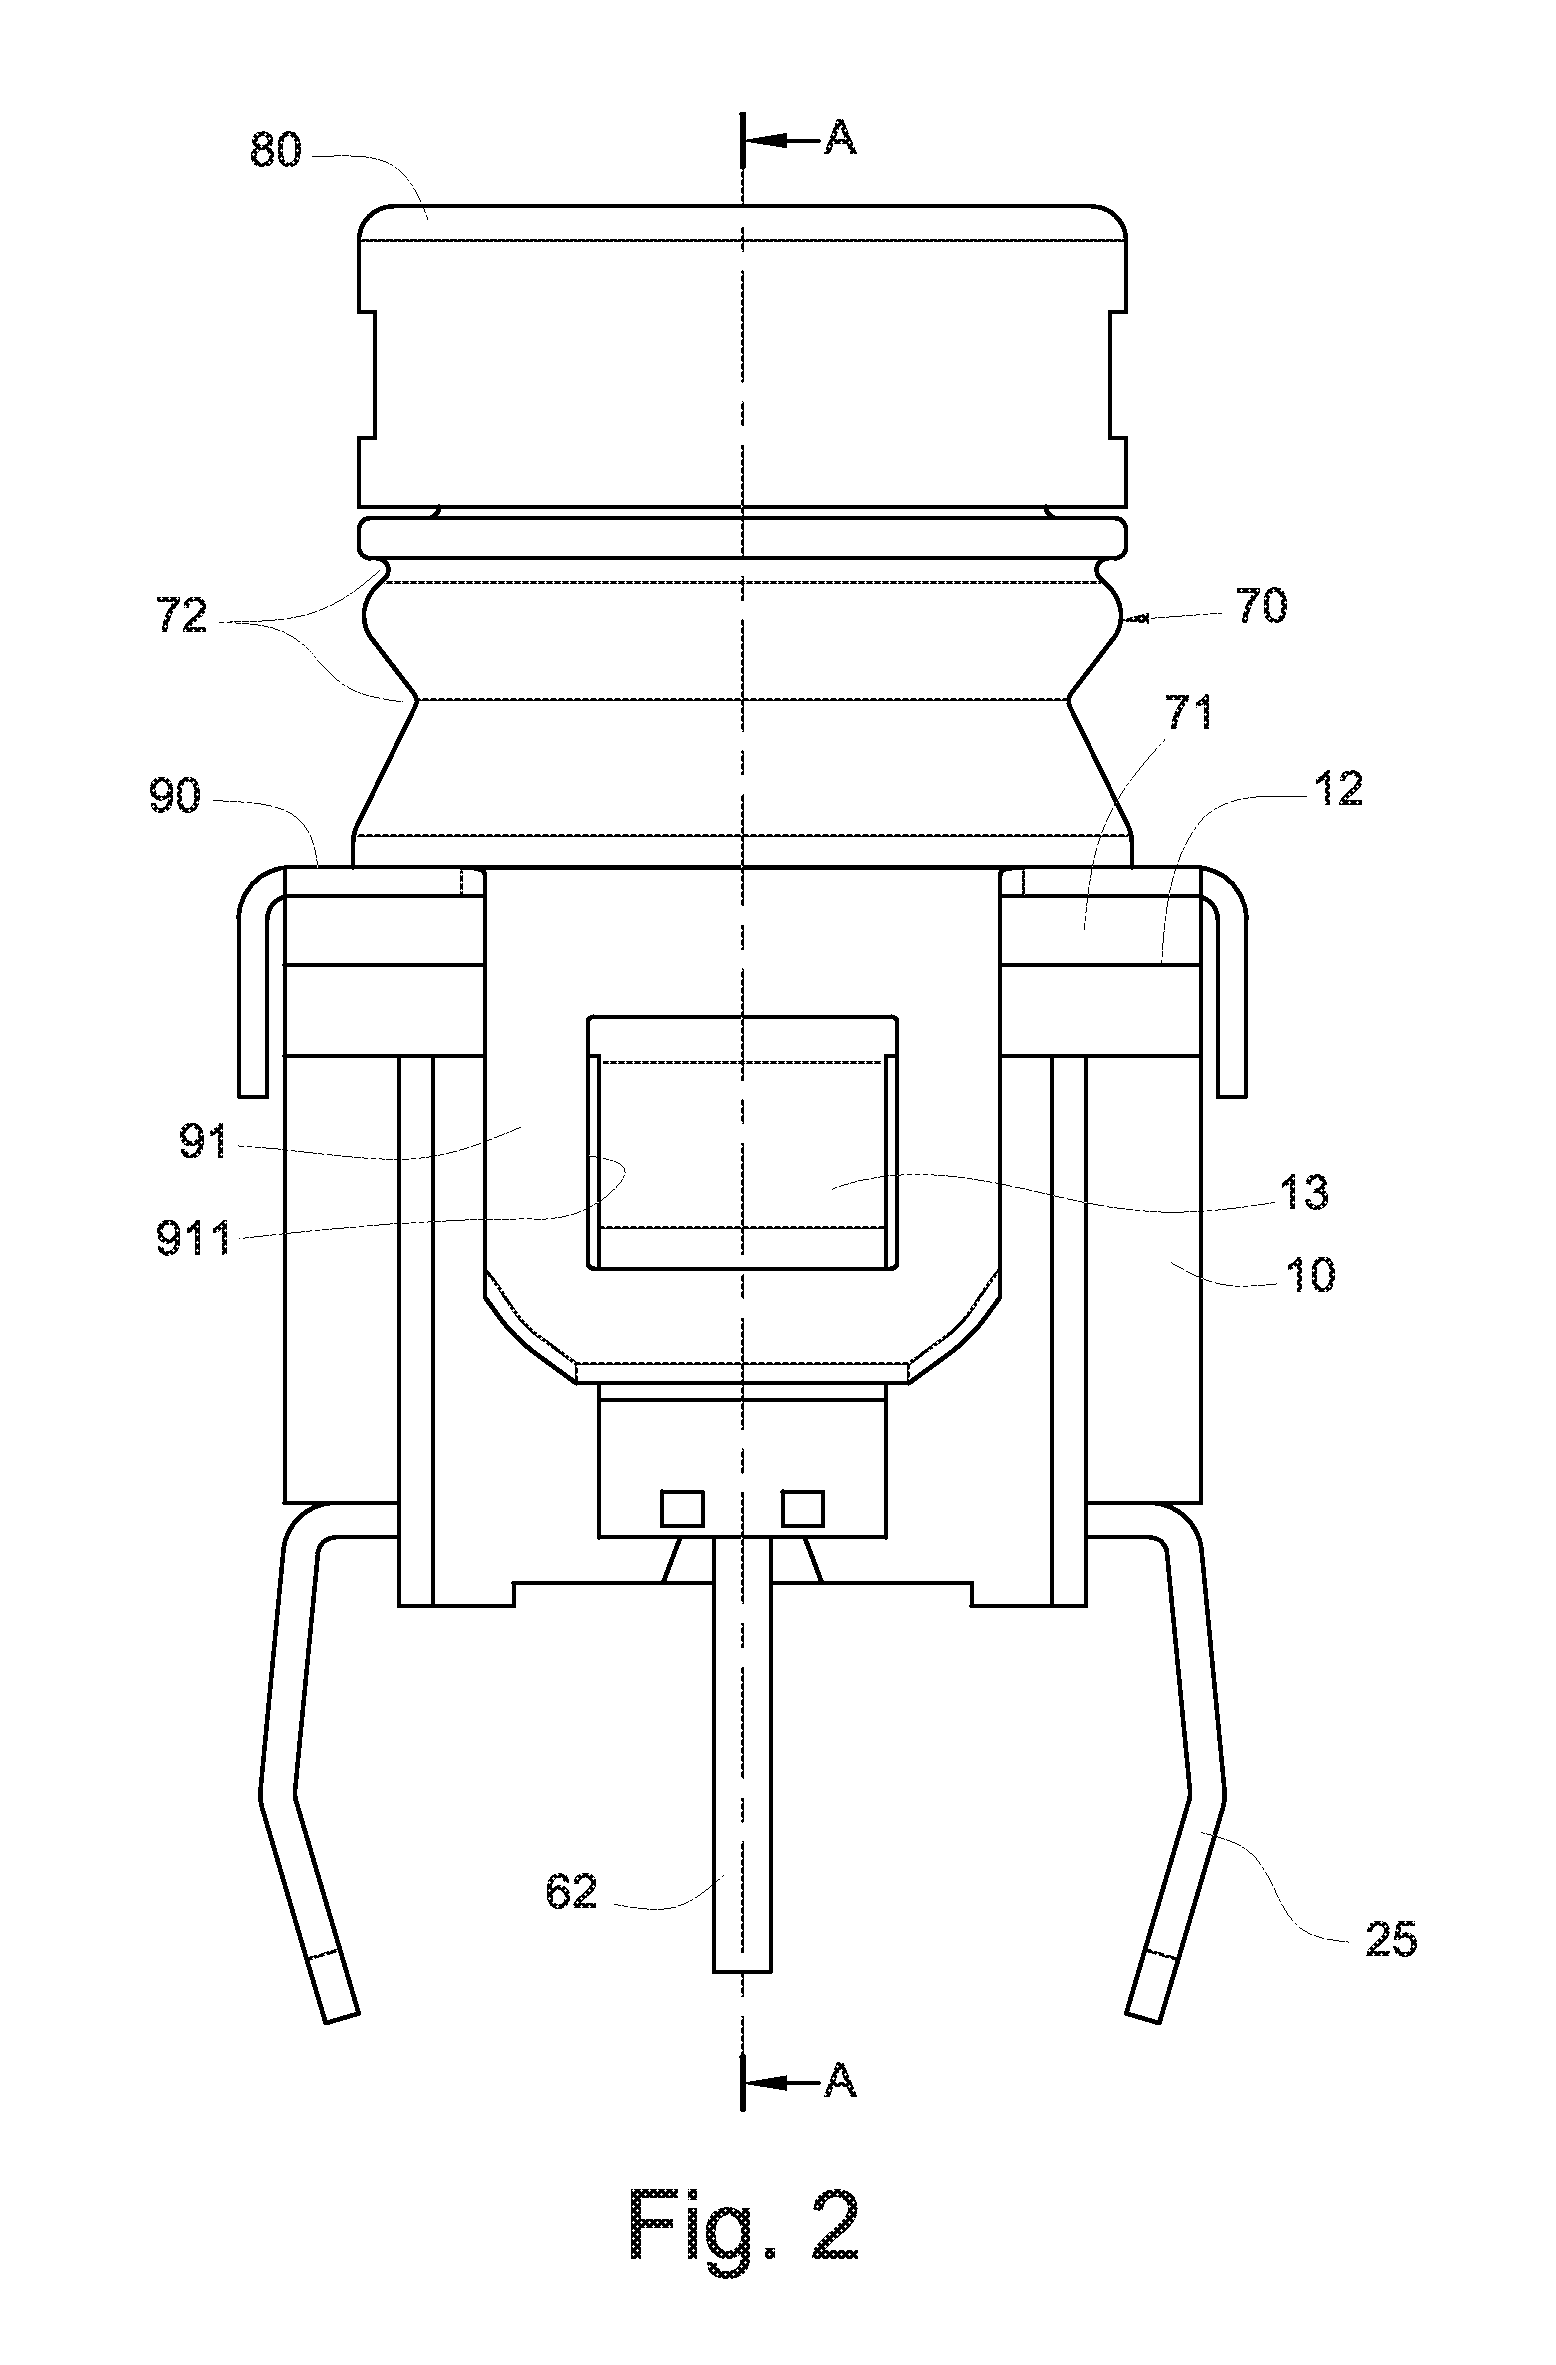 Electrically conductive structure of micro switch